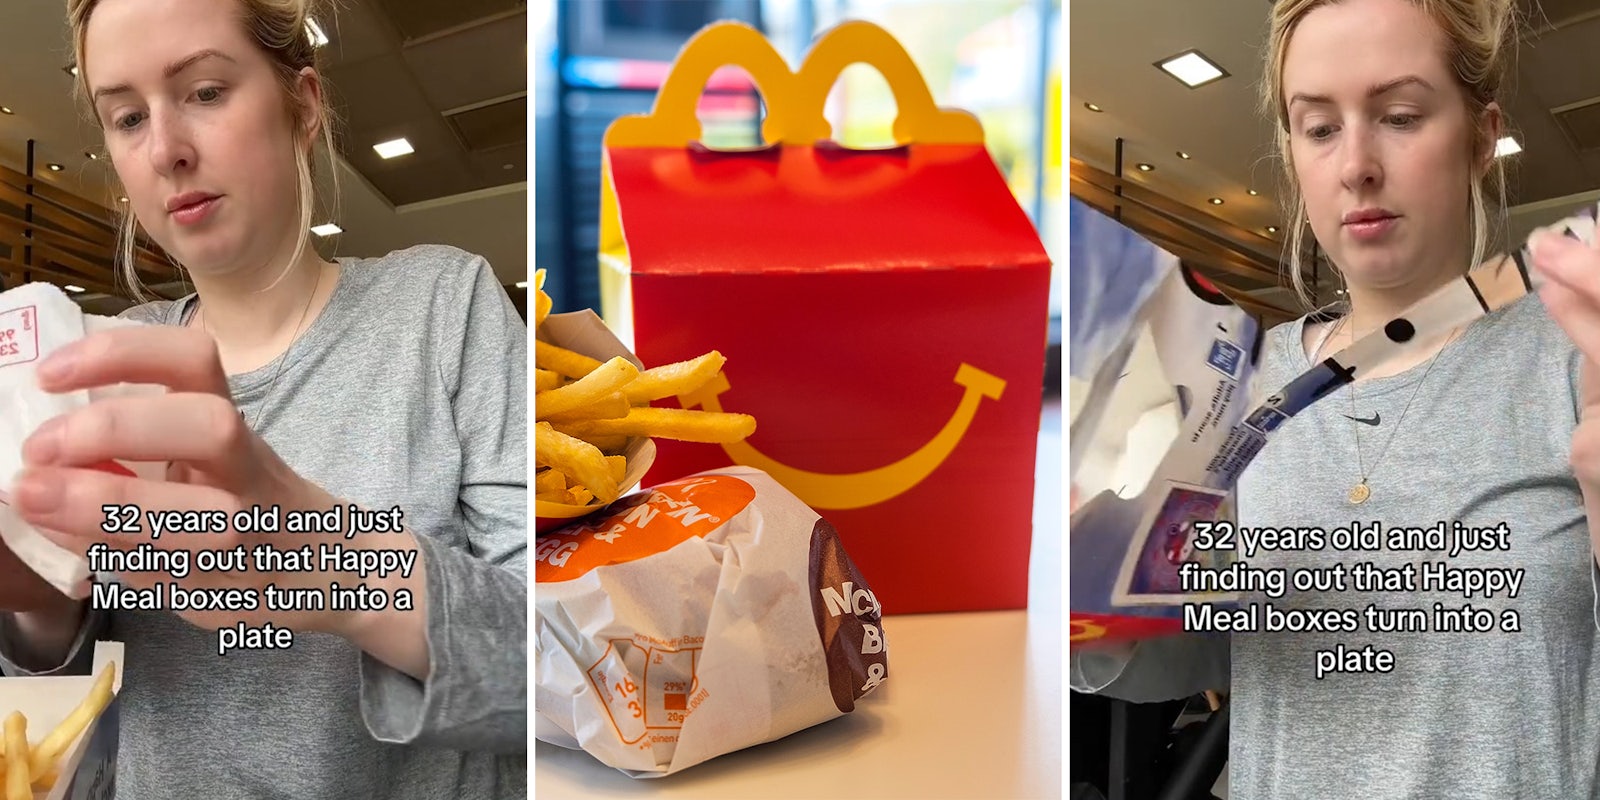 Woman finds out how to use McDonald’s Happy Meal box